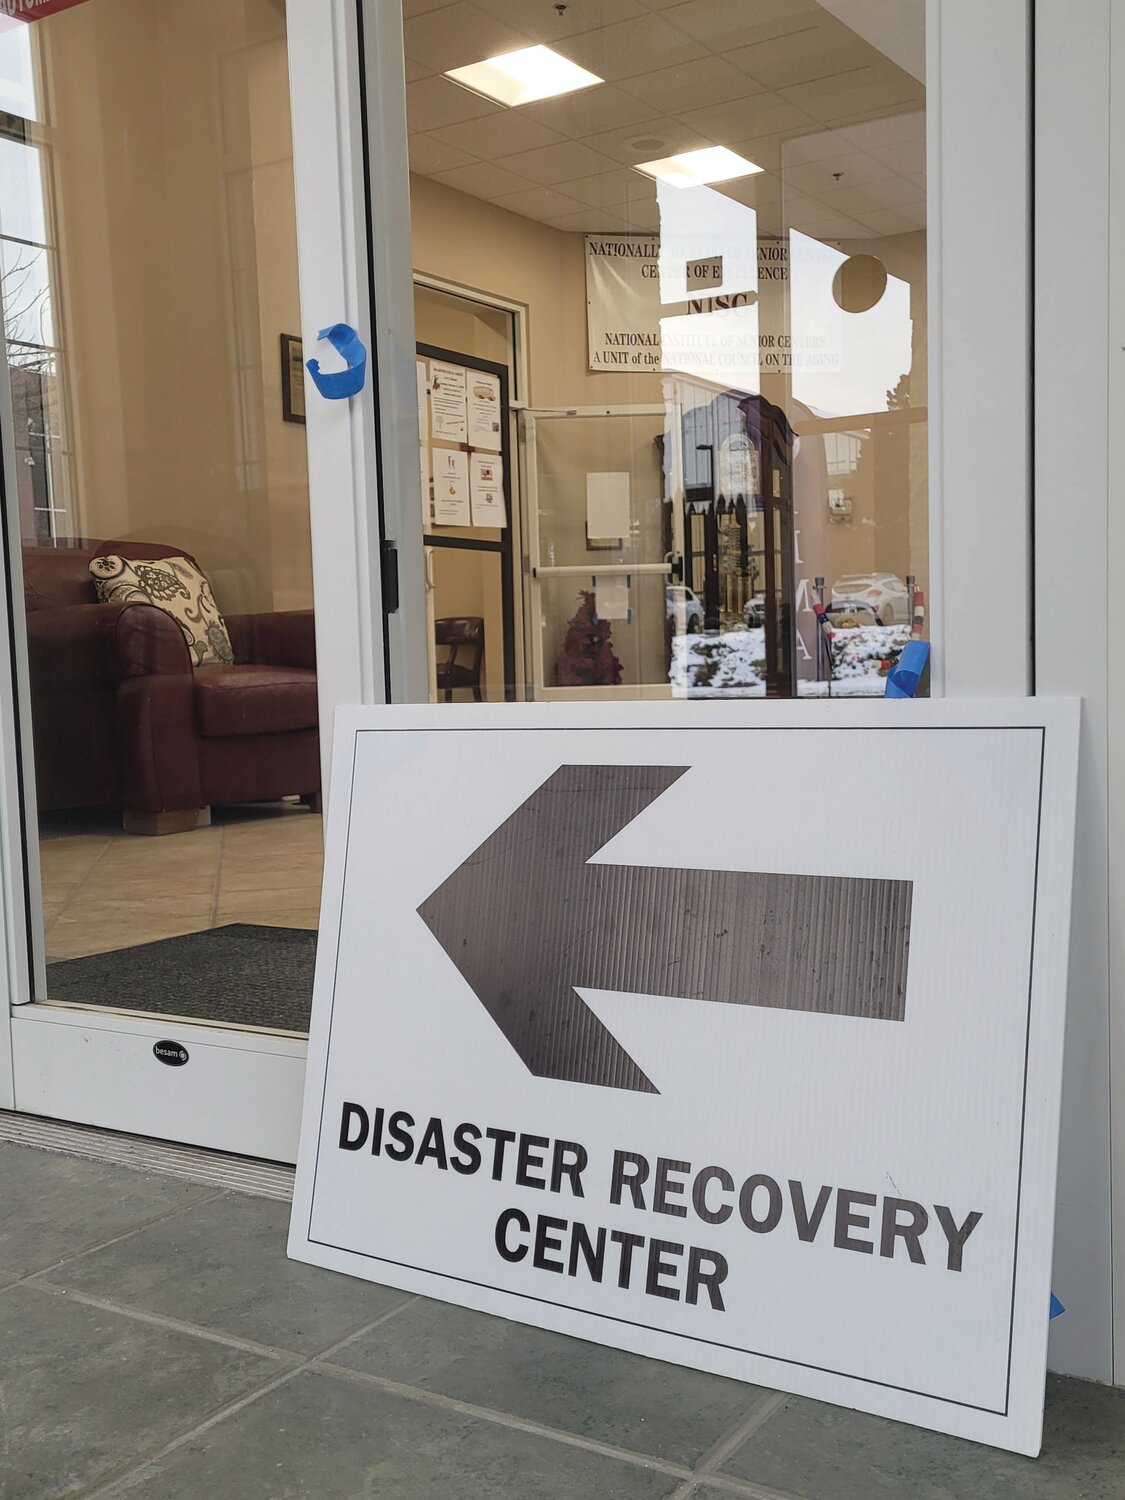 FEMA ARRIVES: Above, the Federal Emergency Management Agency (FEMA) has opened a disaster recovery center (DRC) in the Johnston Senior Center at 1291 Hartford Ave. The Johnston DRC hours of operation: Monday-Friday, 9 a.m. to 6:30 p.m.; Saturday 9 a.m. to 5 p.m.; and closed on Sunday.